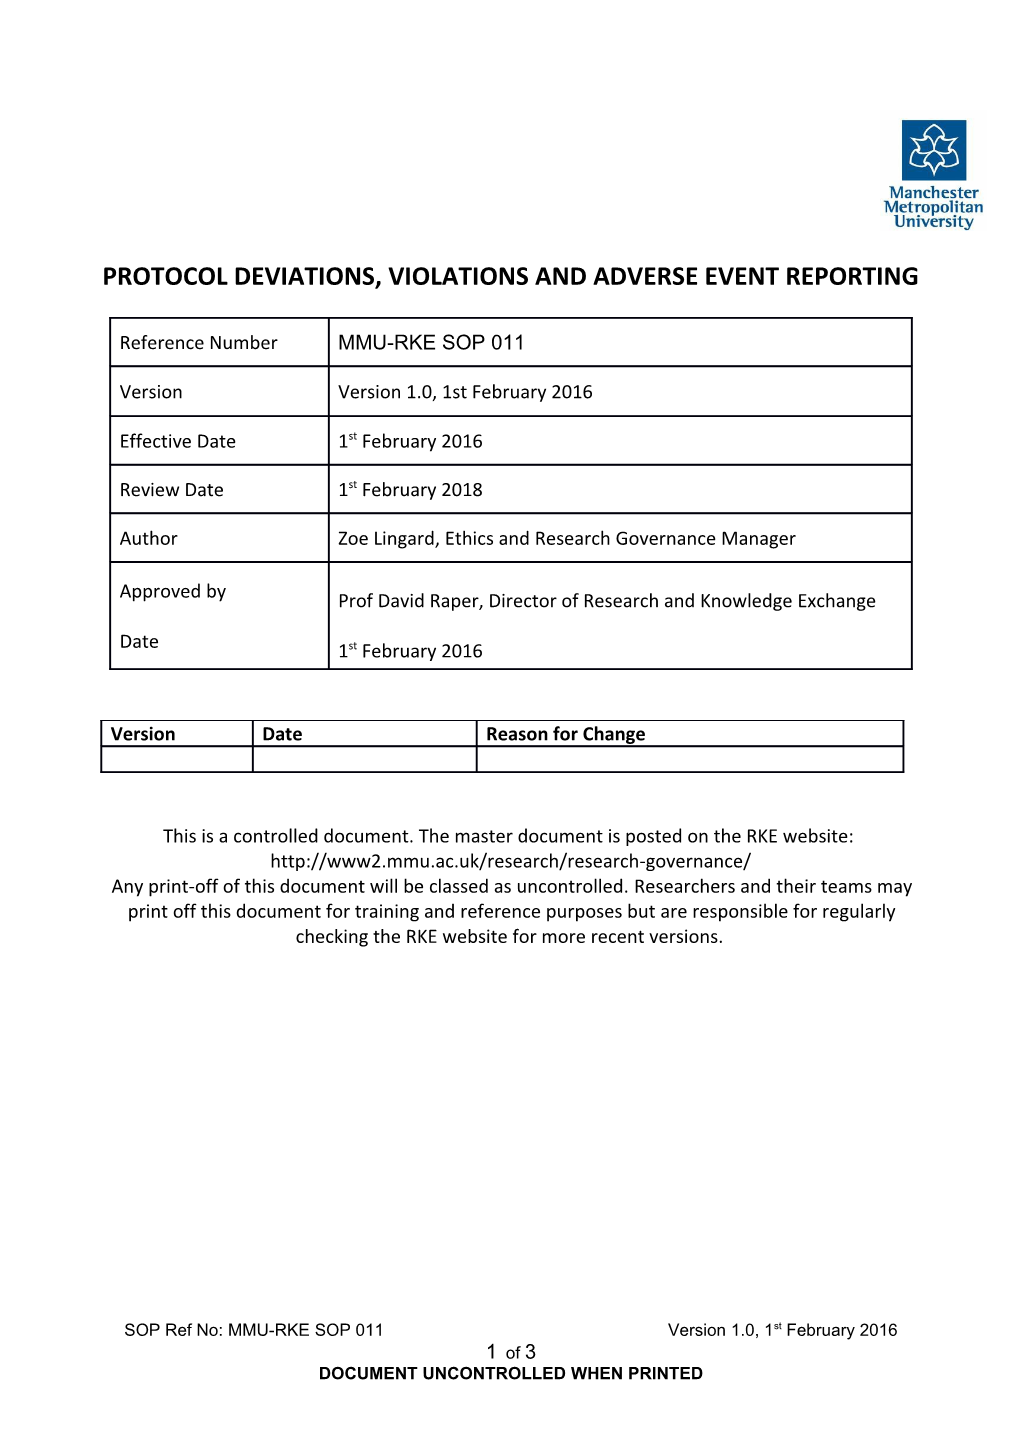 Protocol Deviations, Violations and Adverse Event Reporting